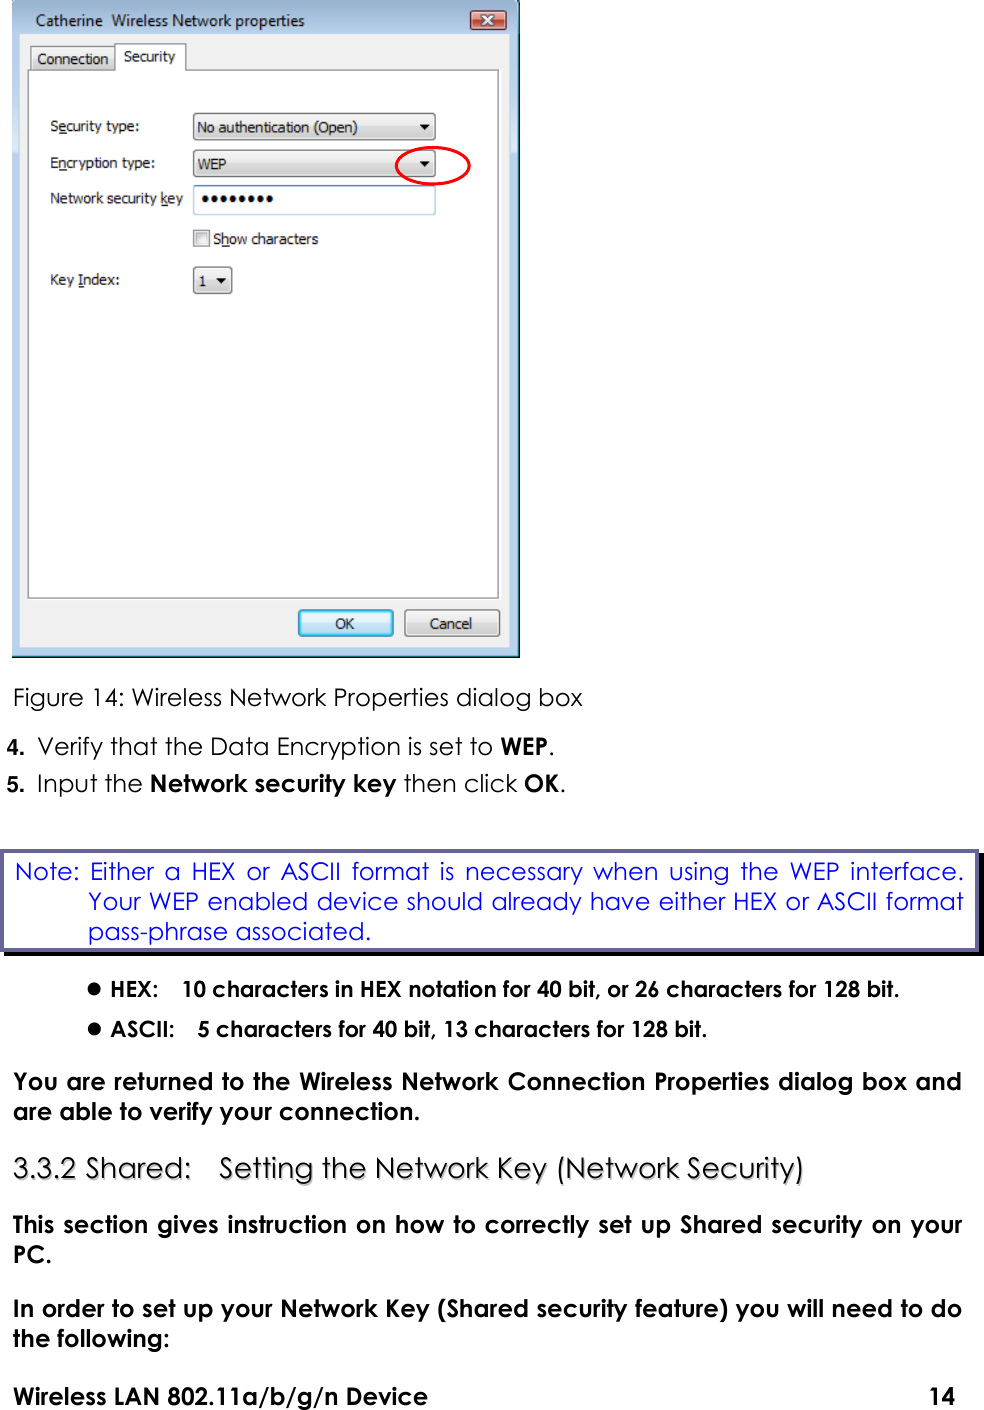 Wireless LAN 802.11a/b/g/n Device                                                                                  14  Figure 14: Wireless Network Properties dialog box 4. Verify that the Data Encryption is set to WEP. 5. Input the Network security key then click OK.  HEX:    10 characters in HEX notation for 40 bit, or 26 characters for 128 bit.  ASCII:    5 characters for 40 bit, 13 characters for 128 bit. You are returned to the Wireless Network Connection Properties dialog box and are able to verify your connection.   33..33..22  SShhaarreedd::    SSeettttiinngg  tthhee  NNeettwwoorrkk  KKeeyy  ((NNeettwwoorrkk  SSeeccuurriittyy))  This section gives instruction on how to correctly set up Shared security on your PC.   In order to set up your Network Key (Shared security feature) you will need to do the following: Note:  Either a  HEX  or  ASCII  format is  necessary  when using  the  WEP  interface. Your WEP enabled device should already have either HEX or ASCII format pass-phrase associated. 